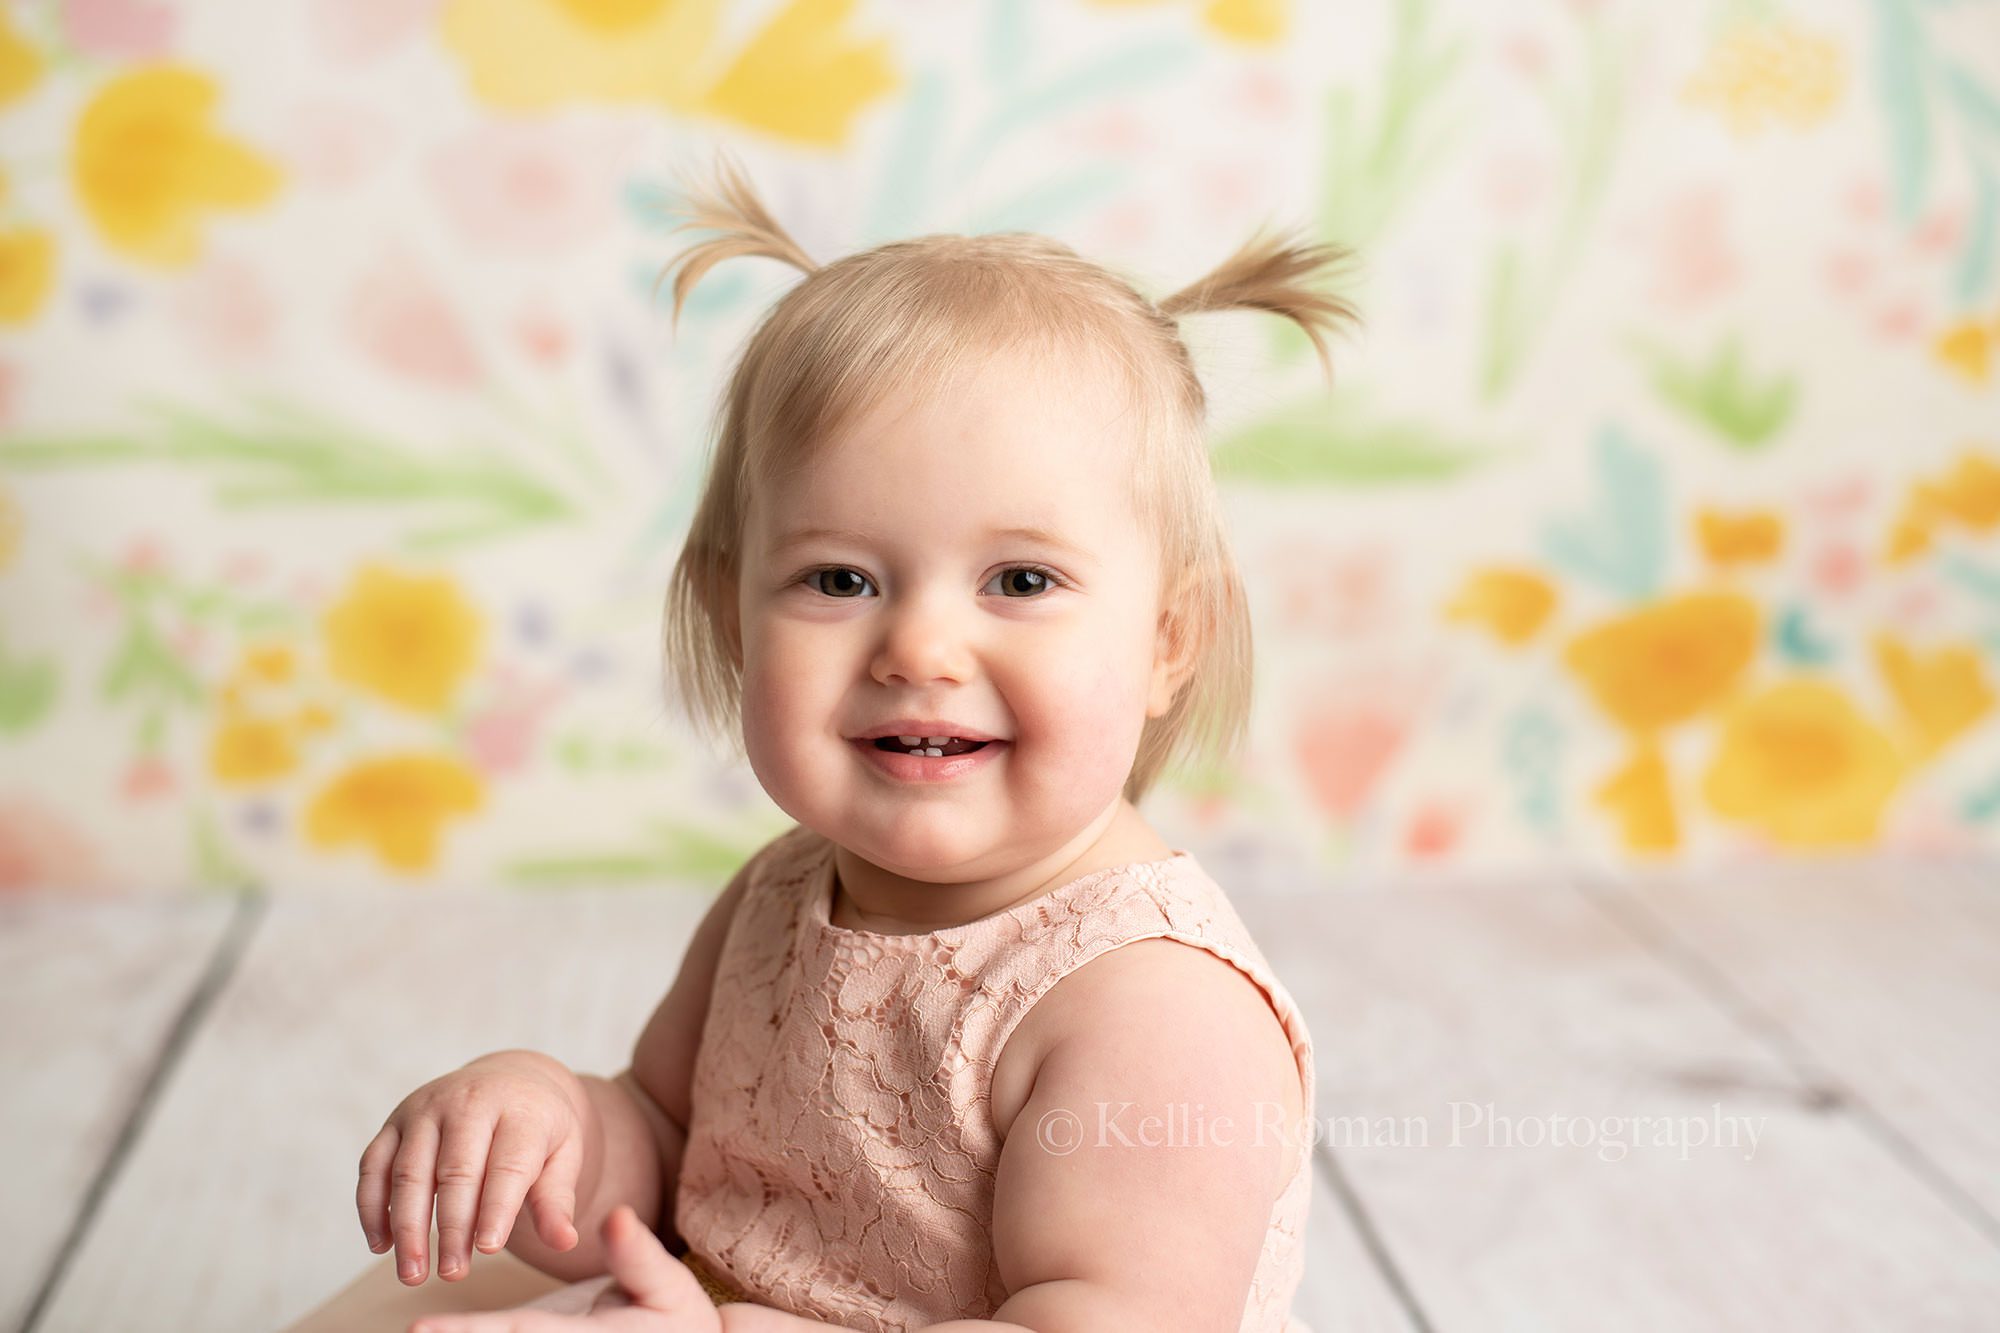 floral milestone session a one year old little girl from kenosha wearing a pink dress in front of a yellow blue pink and purple floral backdrop she's in a Milwaukee photographers studio she is looking at the camera and has a big smile with a few little teeth